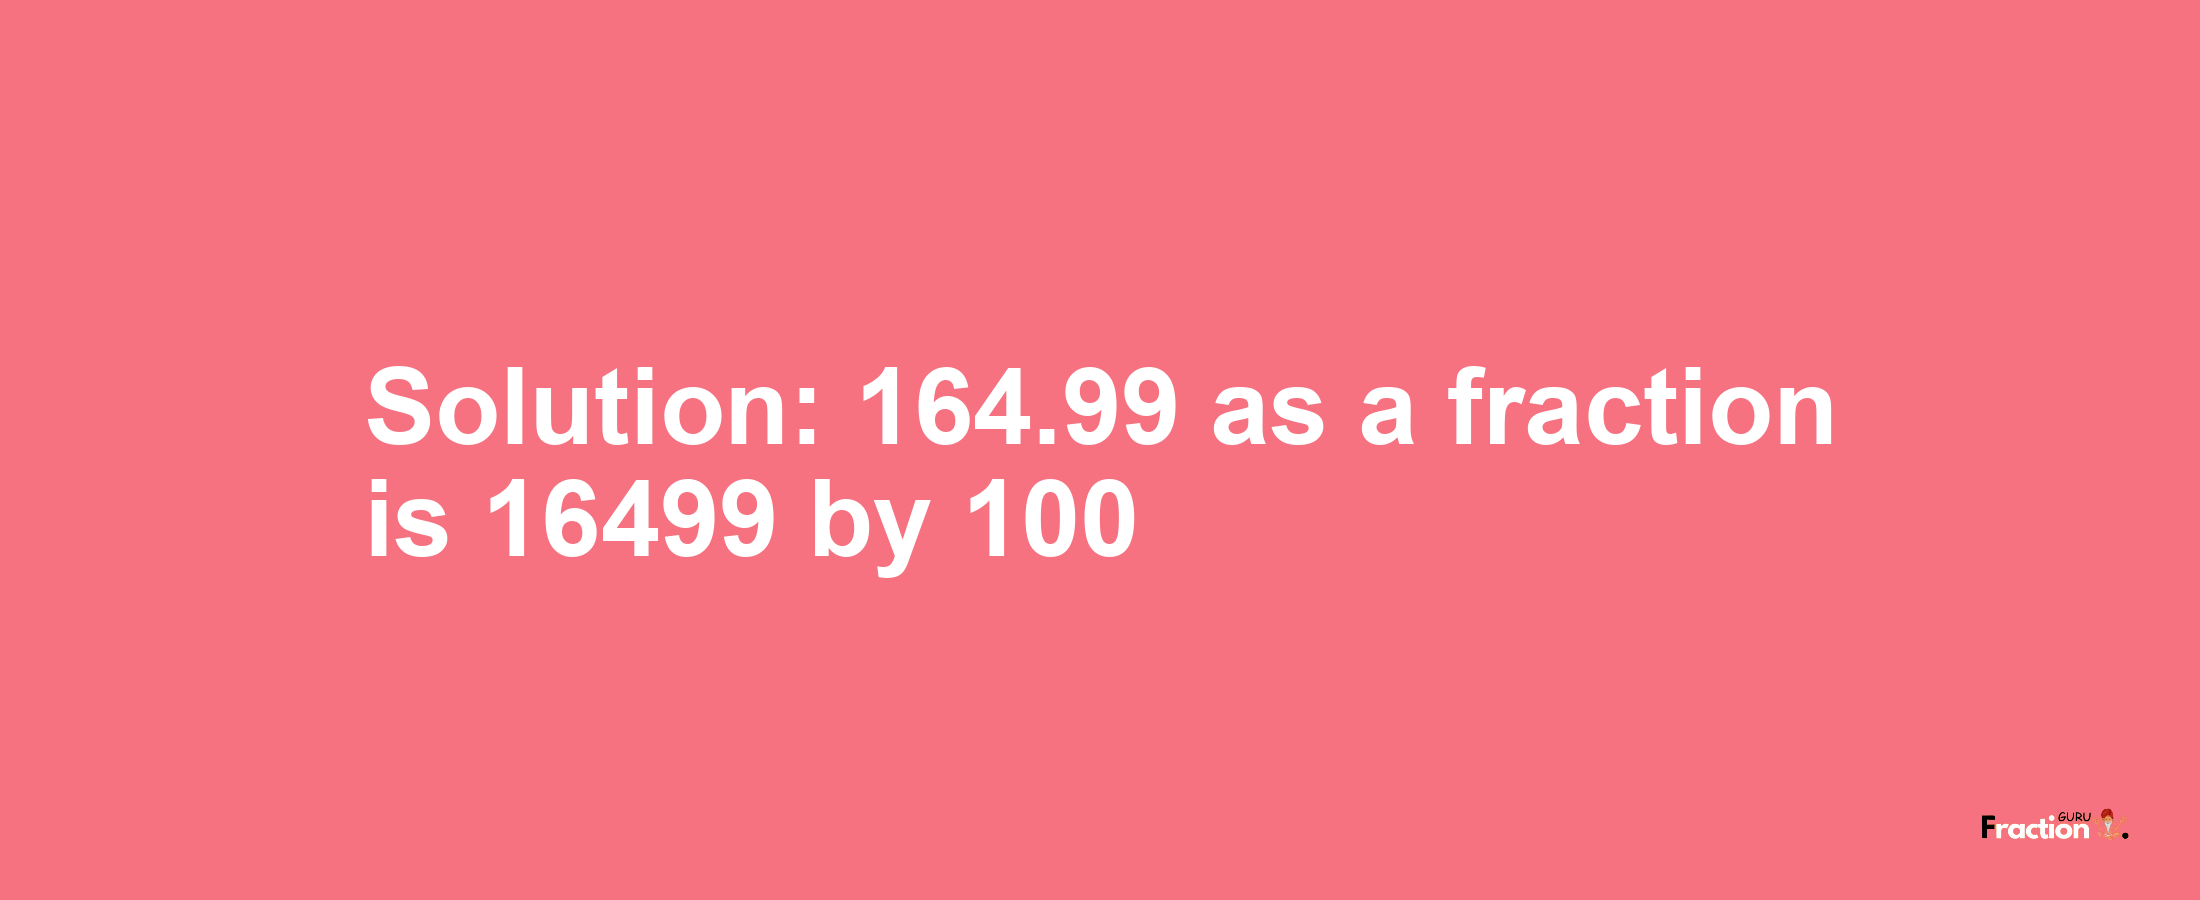 Solution:164.99 as a fraction is 16499/100